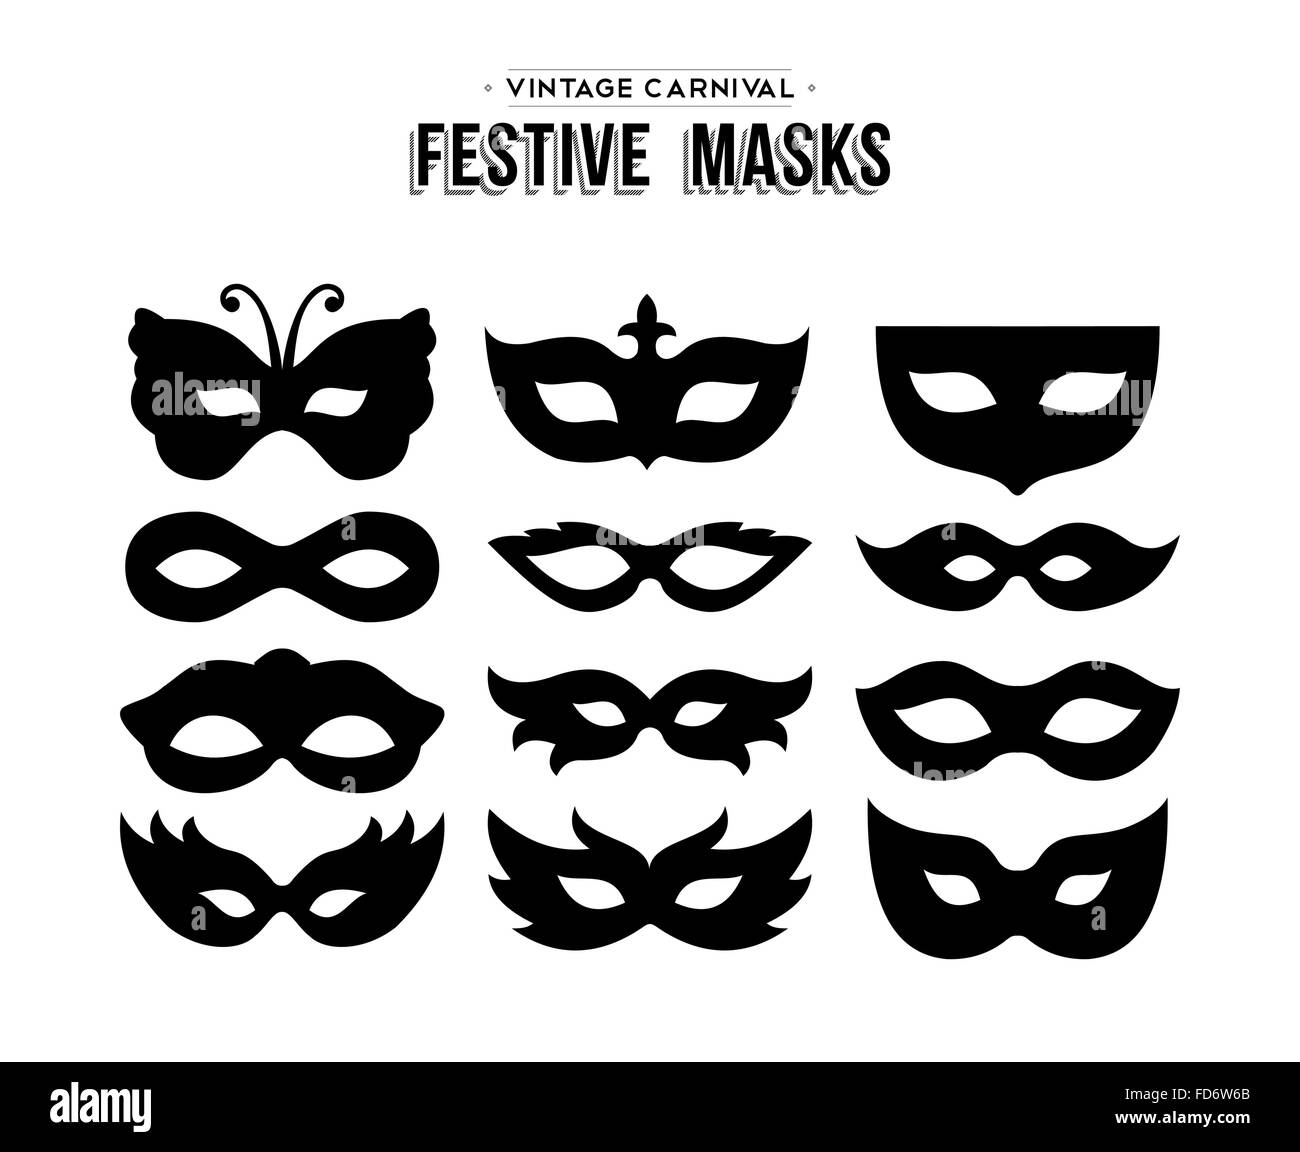 Set of festive vintage carnival masks silhouettes isolated over white. EPS10 vector. Stock Vector